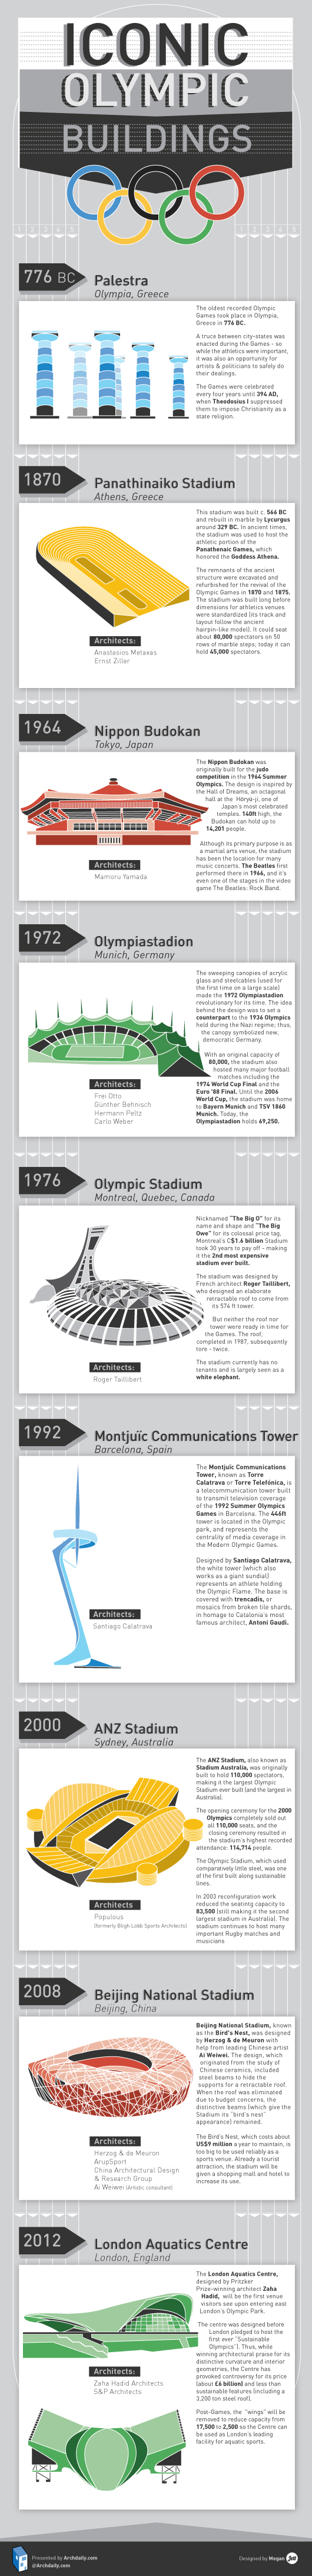 Iconic Olympic Buildings